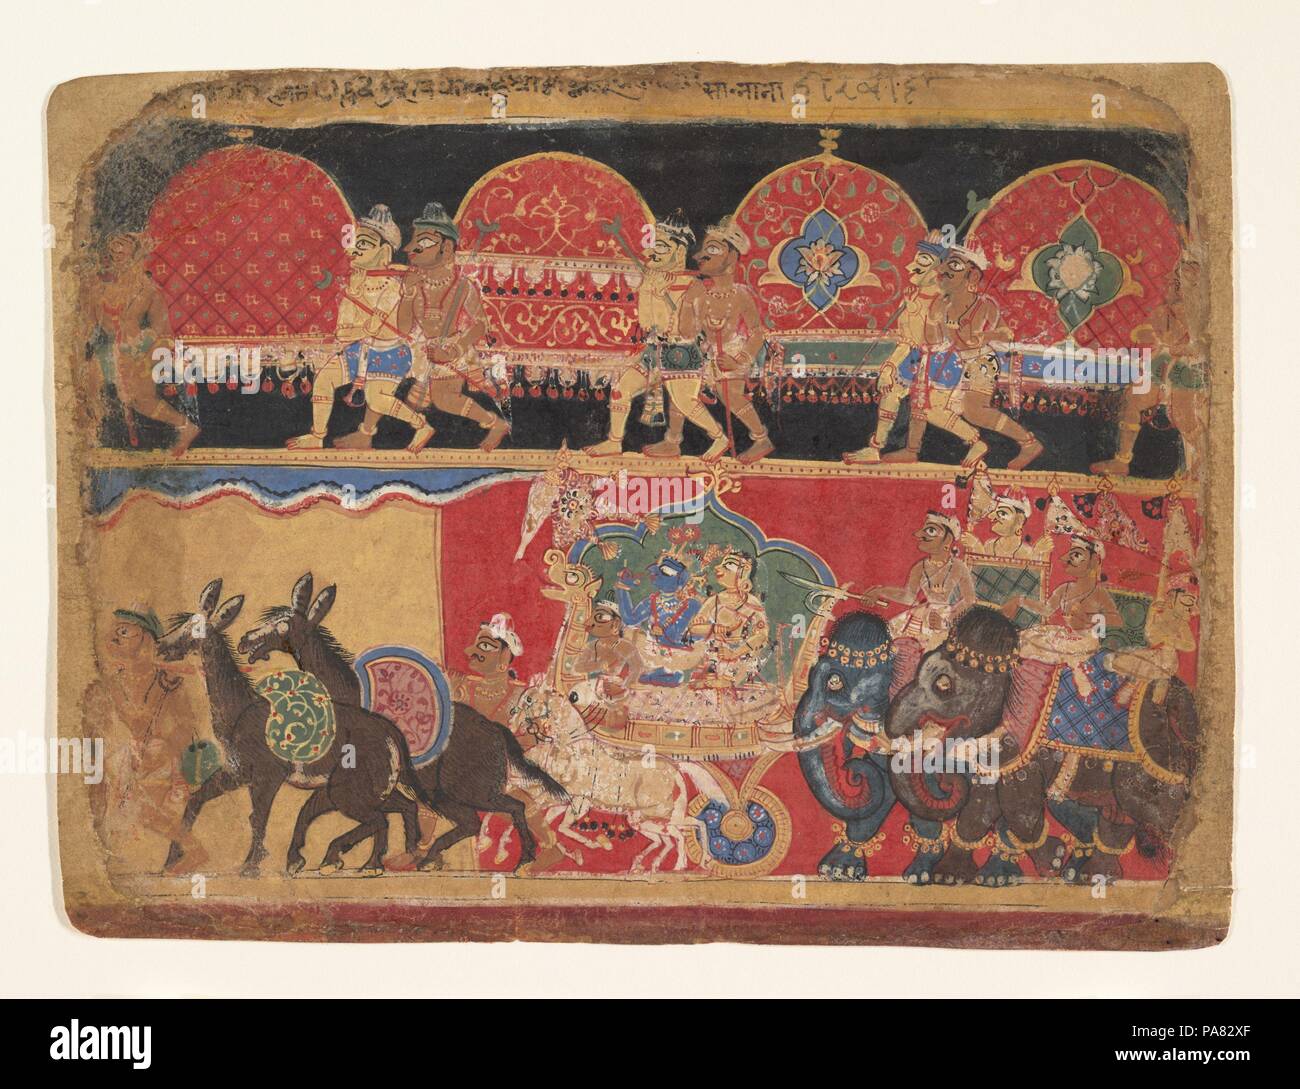 Krishna and the Kshatriya Maidens Proceed to Dvaraka: page from a  Bhagavata Purana series. Artist: Sa Nana. Culture: India (Delhi-Agra area). Dimensions: Image: 6 3/4 in. × 9 in. (17.1 × 22.9 cm)  Sheet: 7 in. × 9 3/8 in. (17.8 × 23.8 cm). Date: ca. 1520-30.  In this episode from the Bhagavata Purana (Ancient Stories of Lord Vishnu), we see Krishna, Satyabhama (one of his wives), and the 16,100 Kshatriya maidens he has rescued (all of whom he later weds), departing the demon Naraka's home in Assam to journey across northern India to Dvaraka, in western India. The ladies travel in regal style, Stock Photo